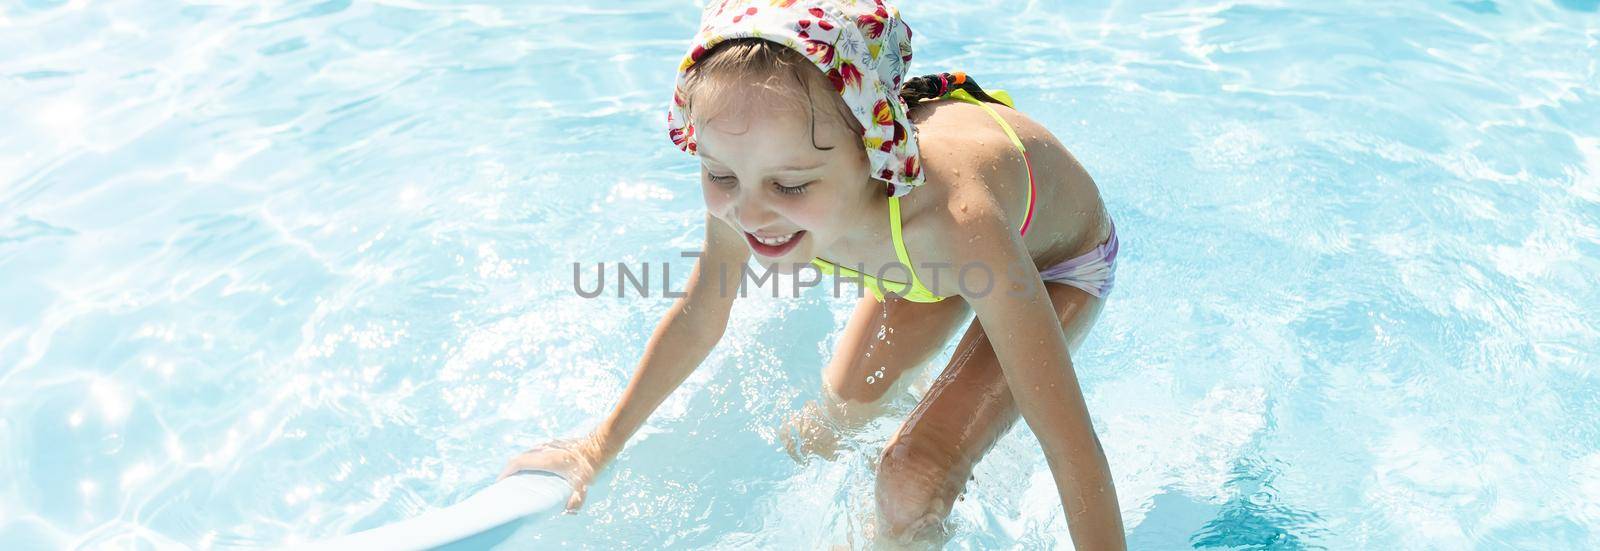 Swimming - little girl playing in blue water by Andelov13